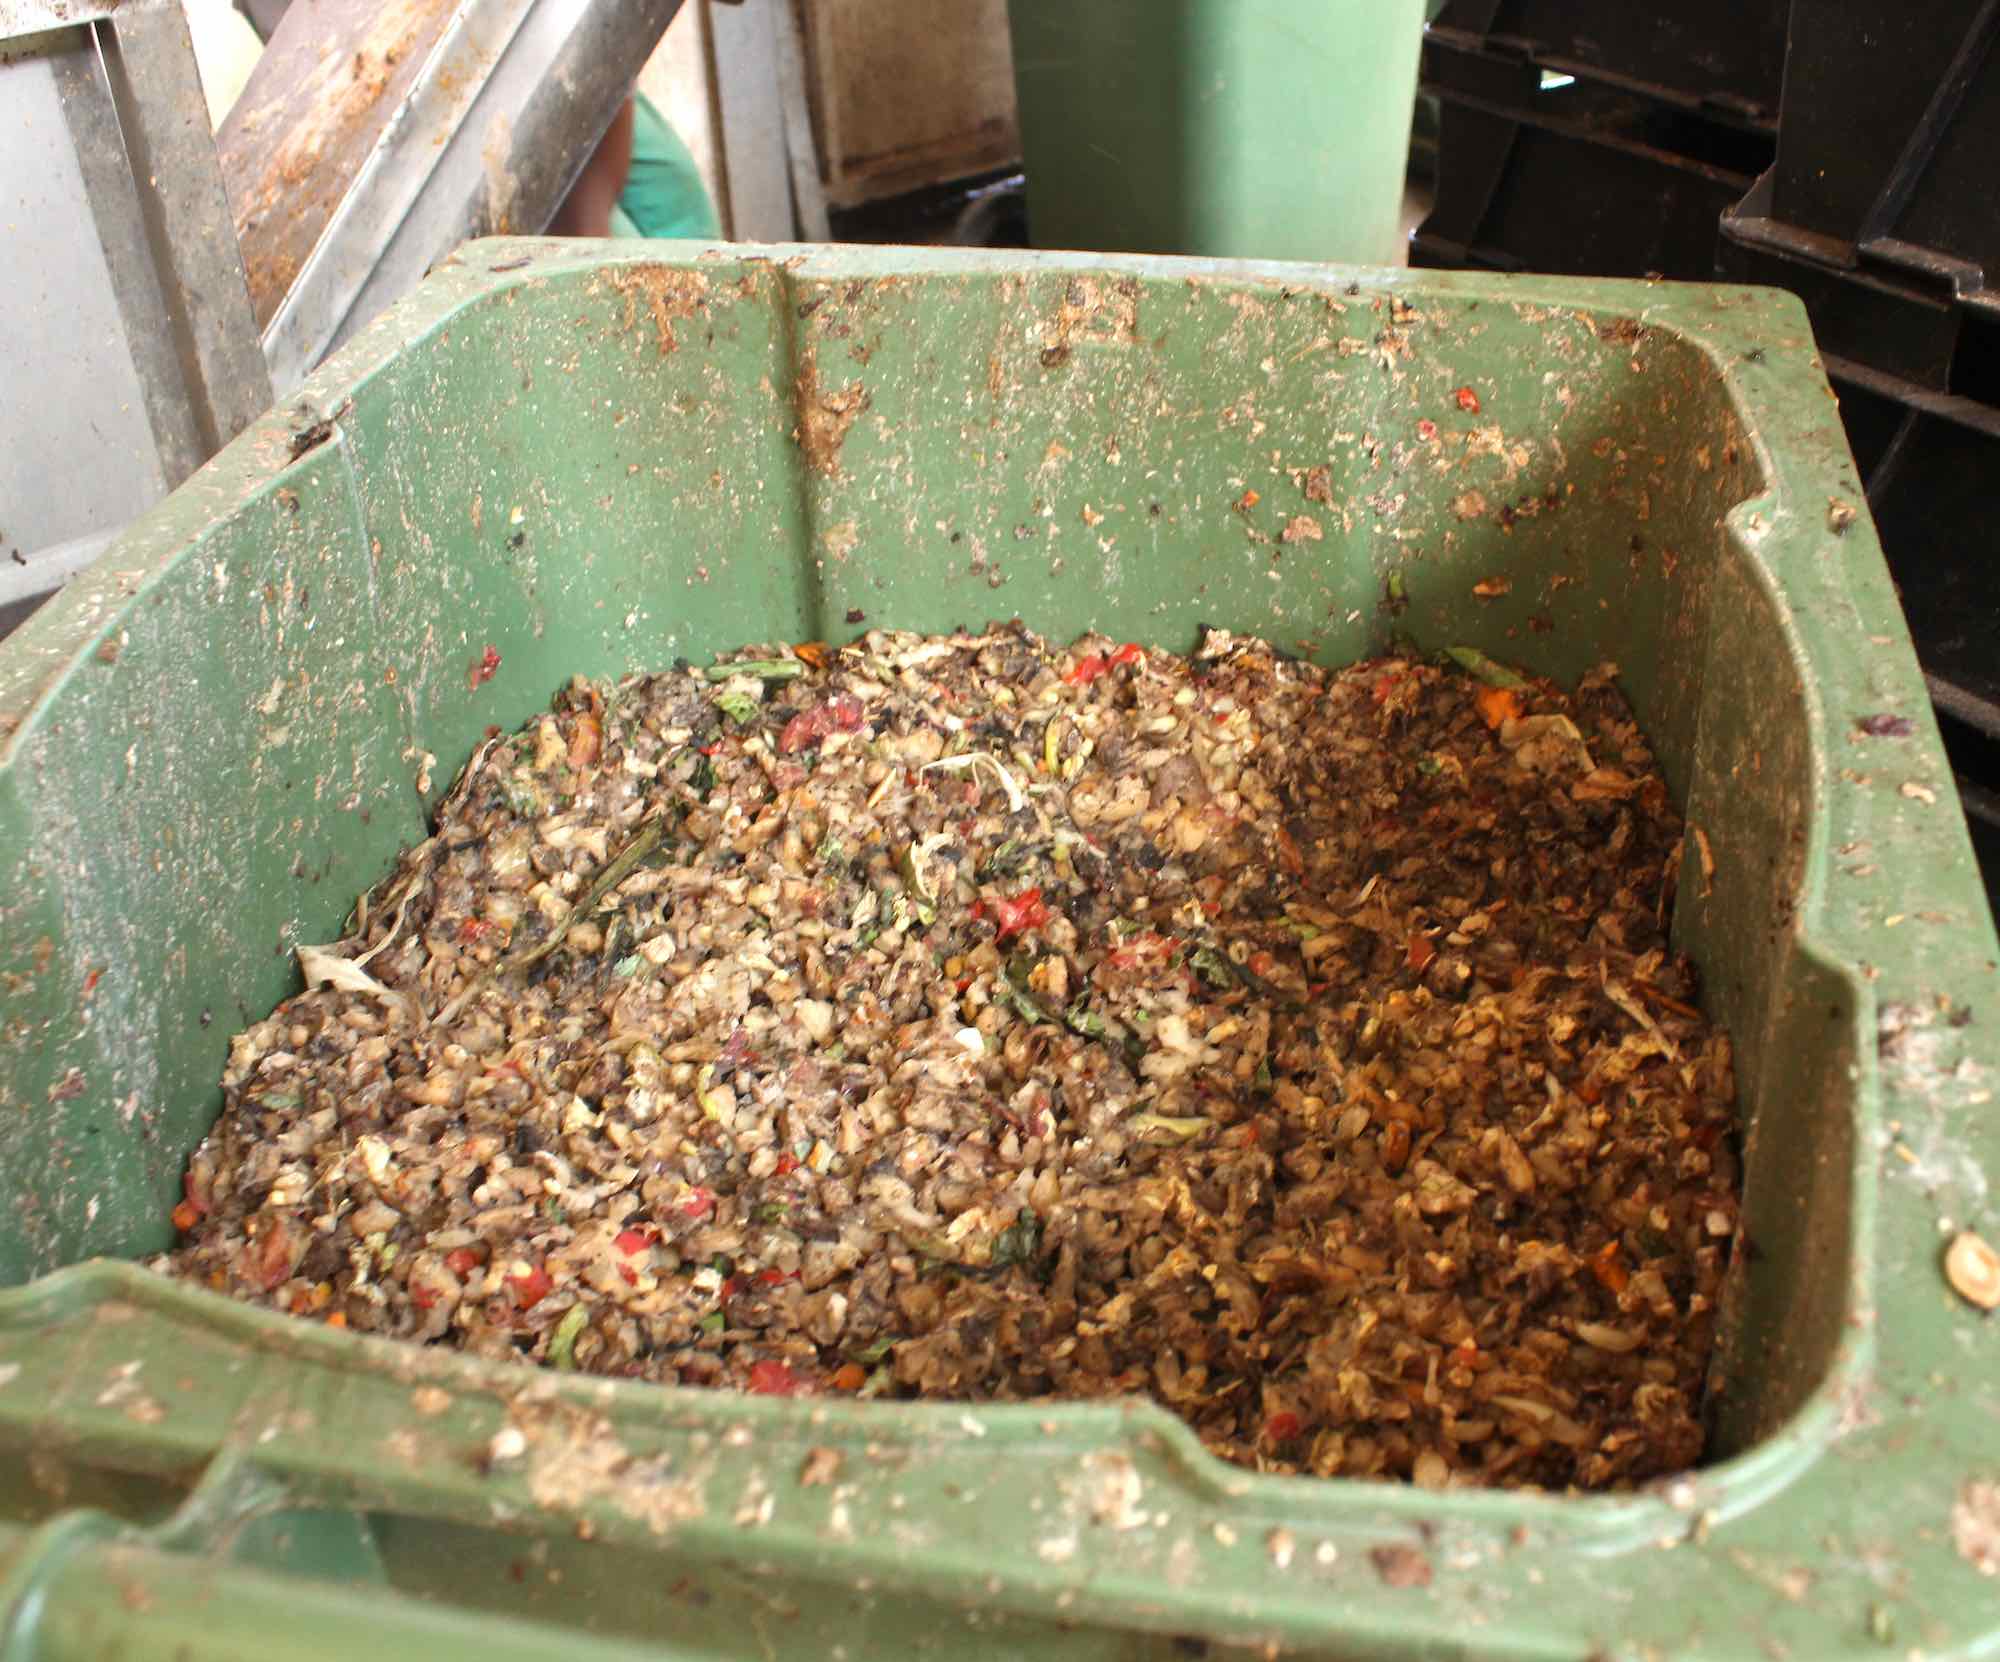 A mass of shredded oragnic waste in a green container.